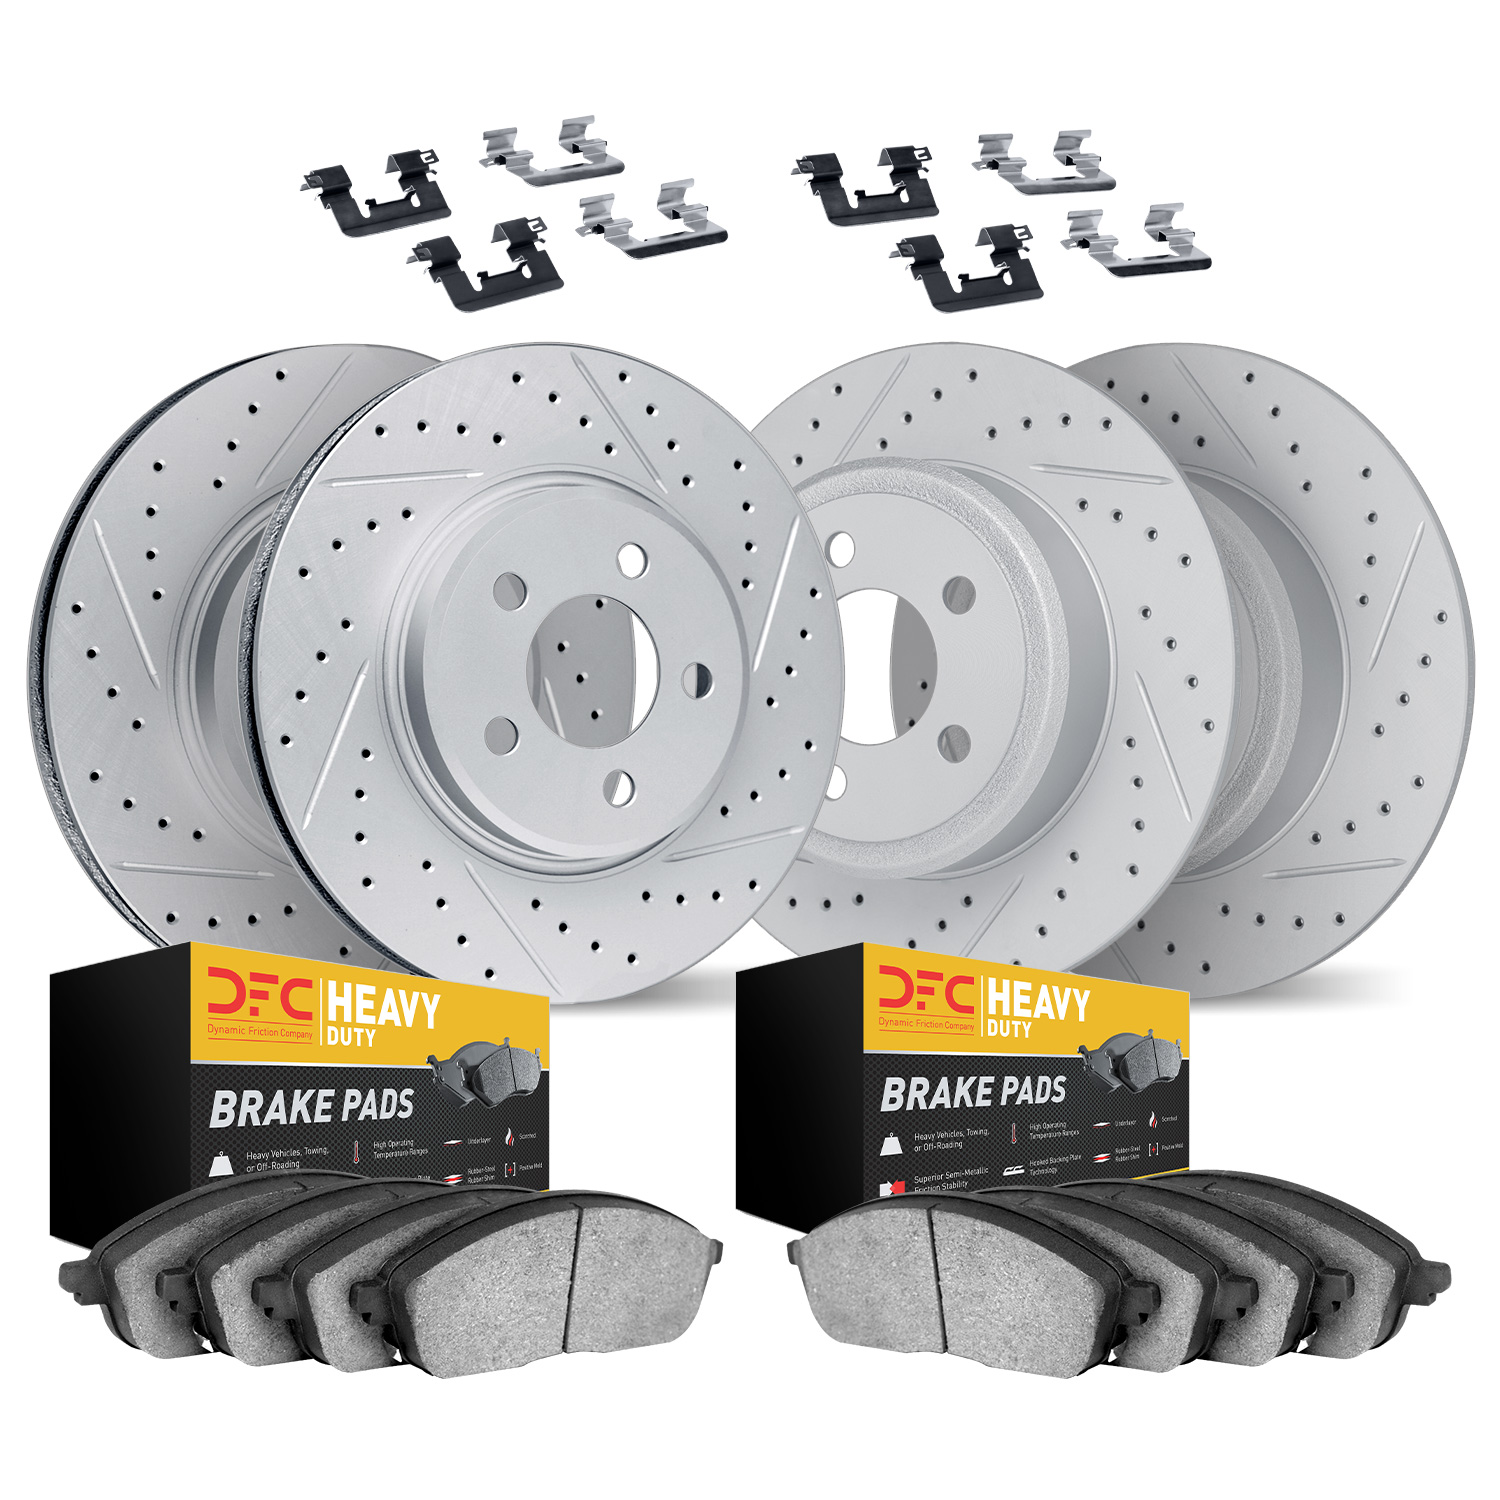 2214-99104 Geoperformance Drilled/Slotted Rotors w/Heavy-Duty Pads Kit & Hardware, 2015-2019 Ford/Lincoln/Mercury/Mazda, Positio